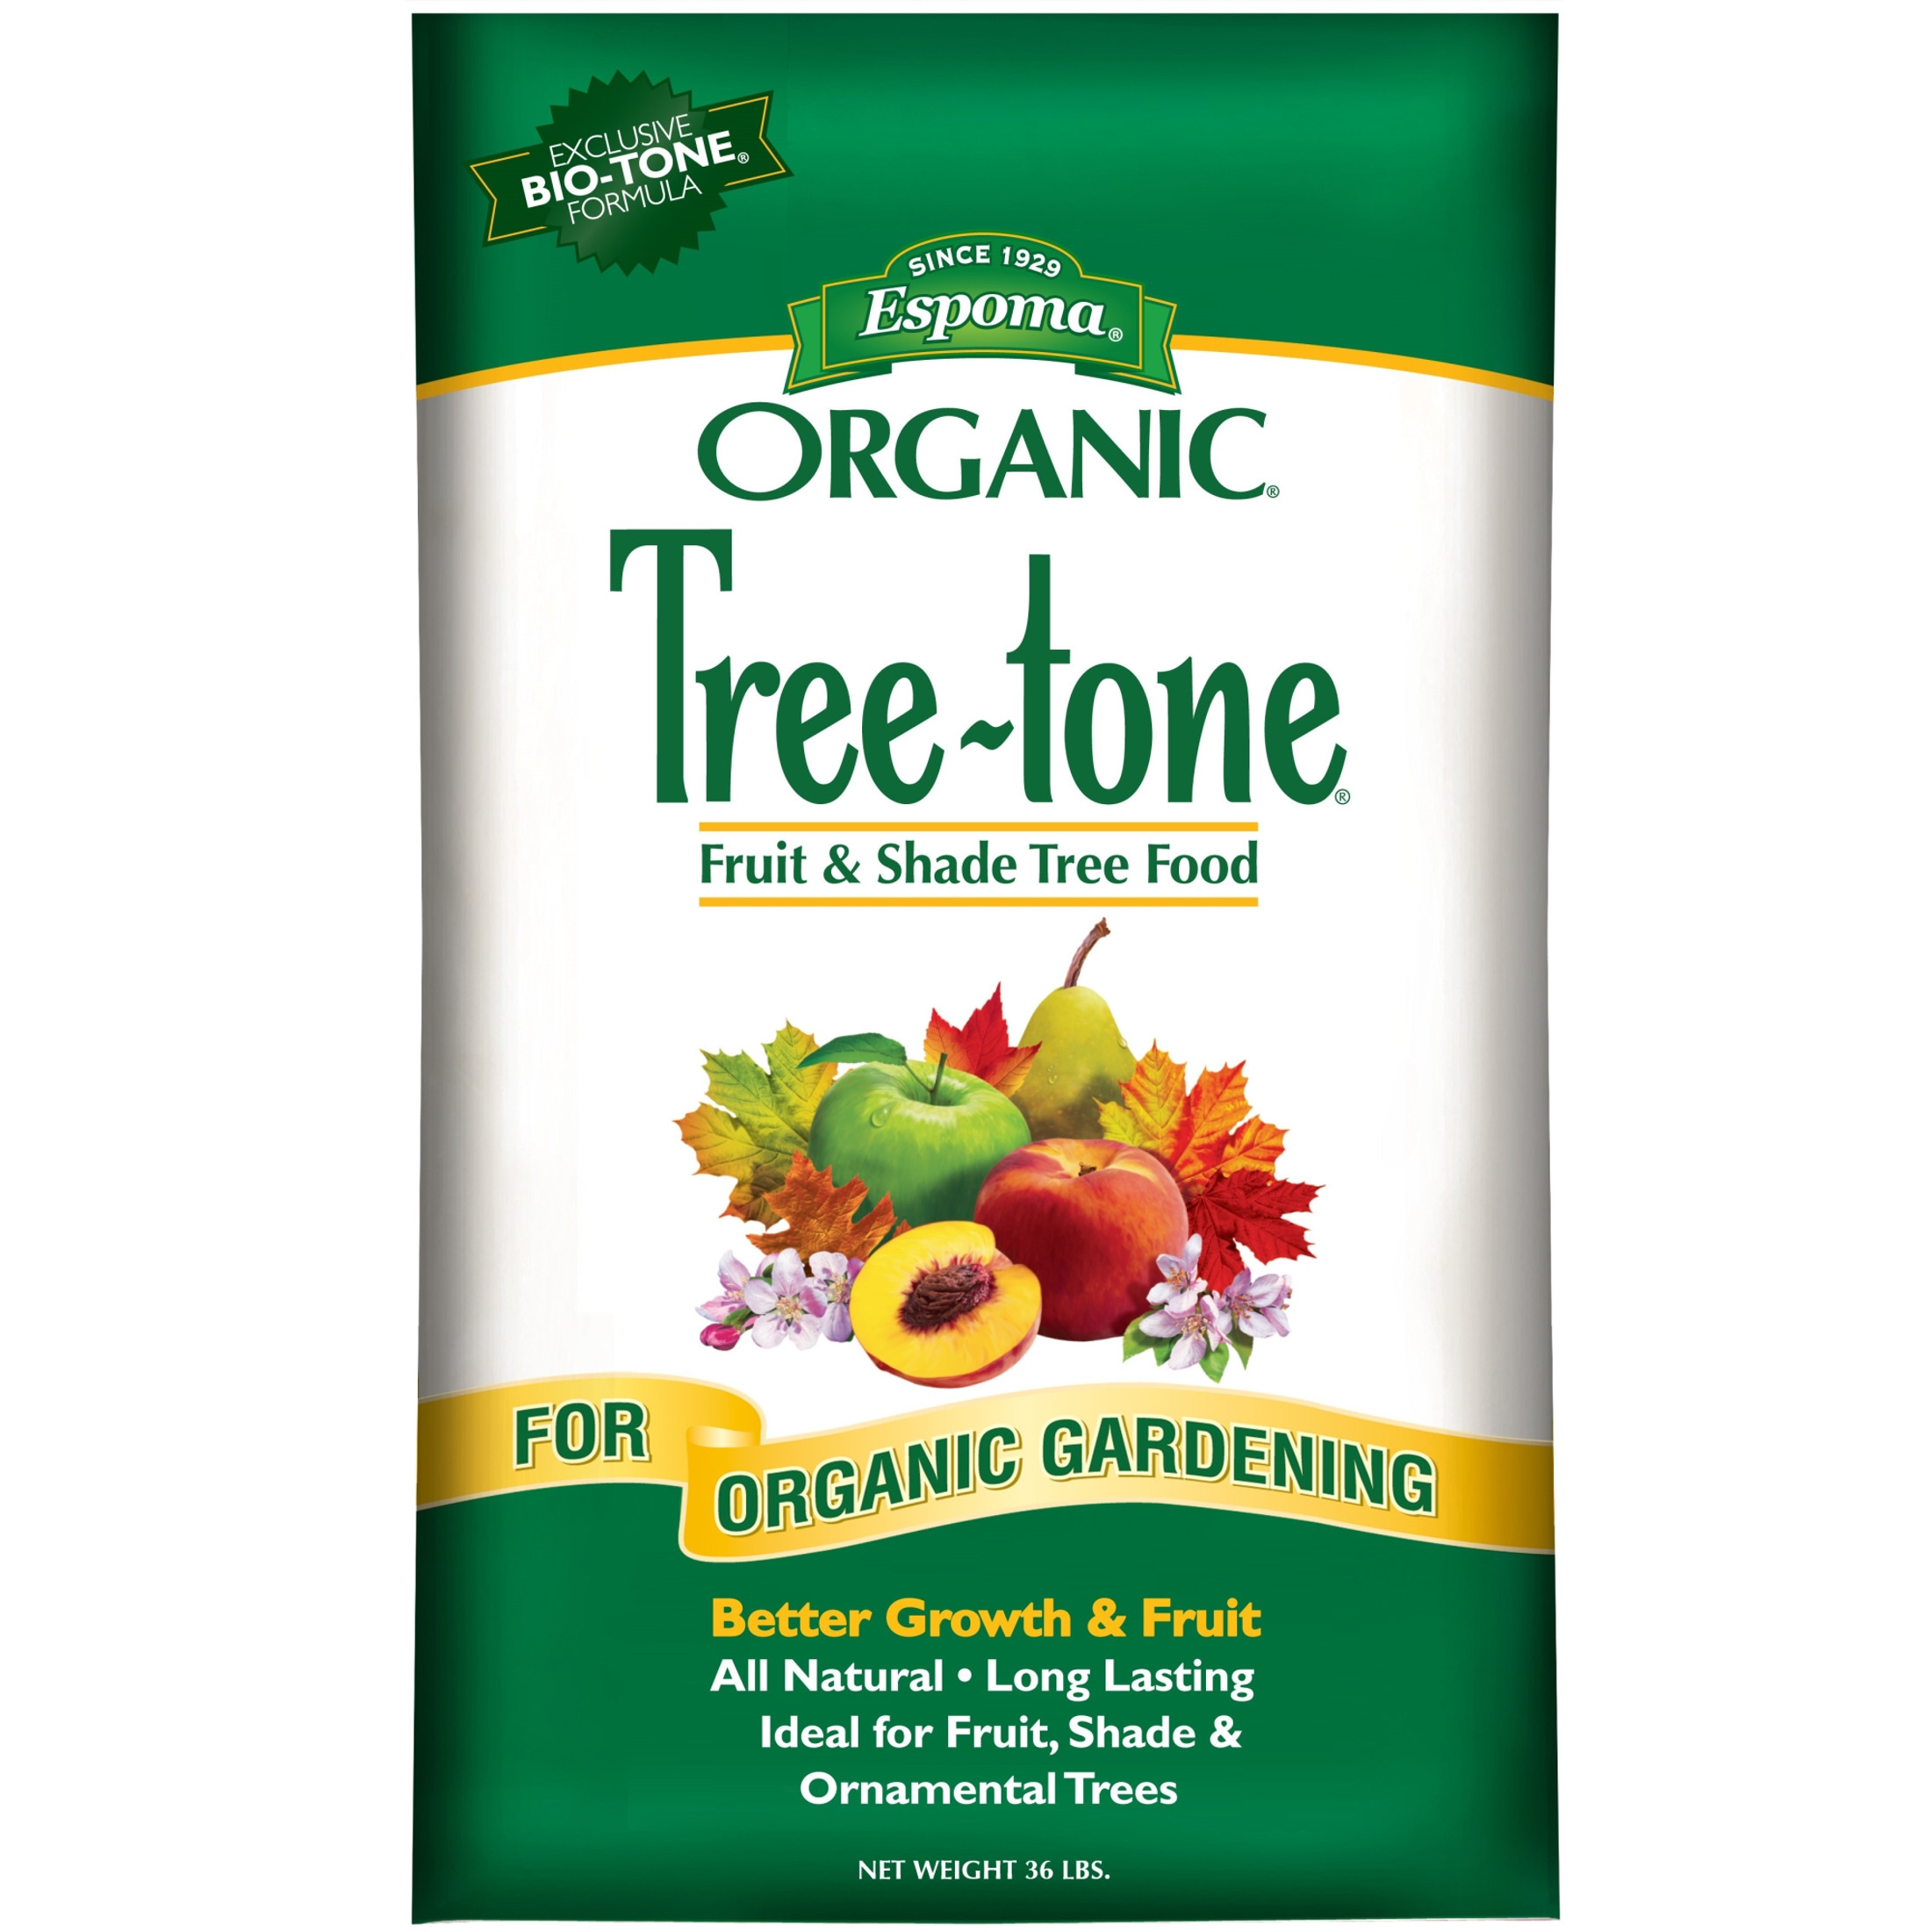 Espoma Organic Tree-tone 6-3-2 Natural & Organic Plant Food for All Trees; Use for Fruit Trees Like Peach & Apple Trees and All Shade Trees, 36lbs (Repaired)